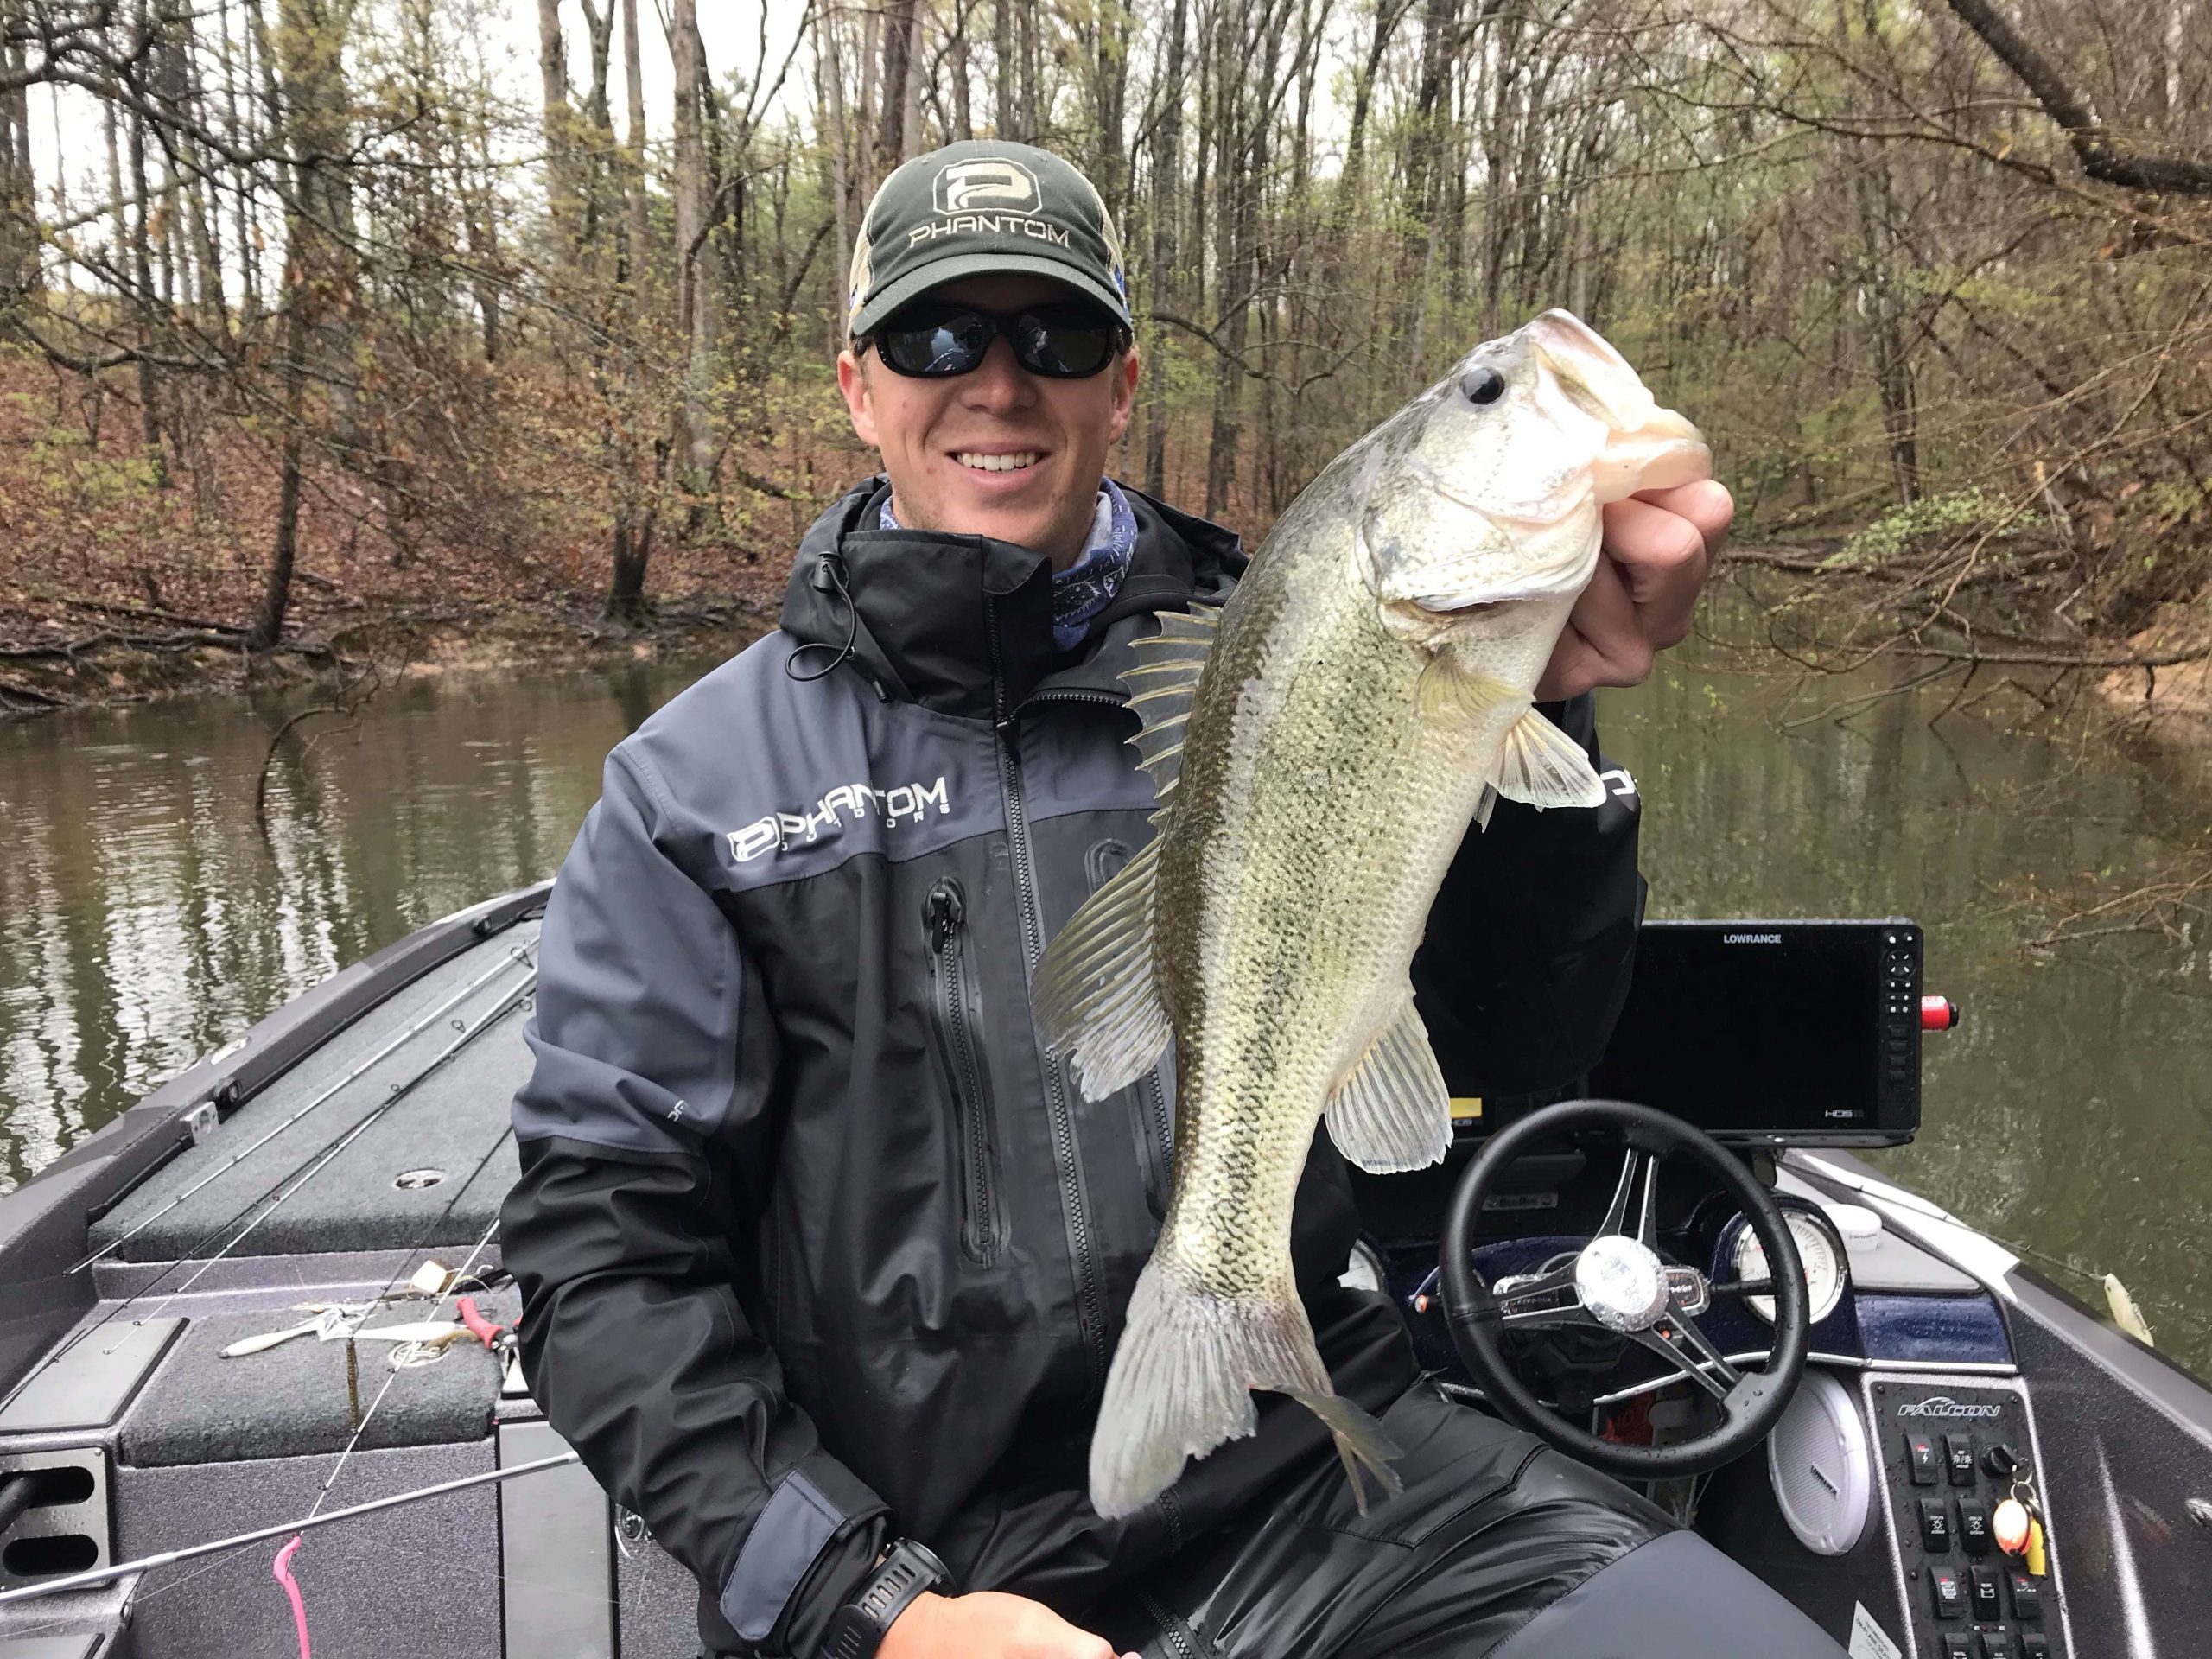 Another cull for Walters, who has slowly been upgrading his bag. He just needs those 1-2 big bites to let him fish tomorrow.